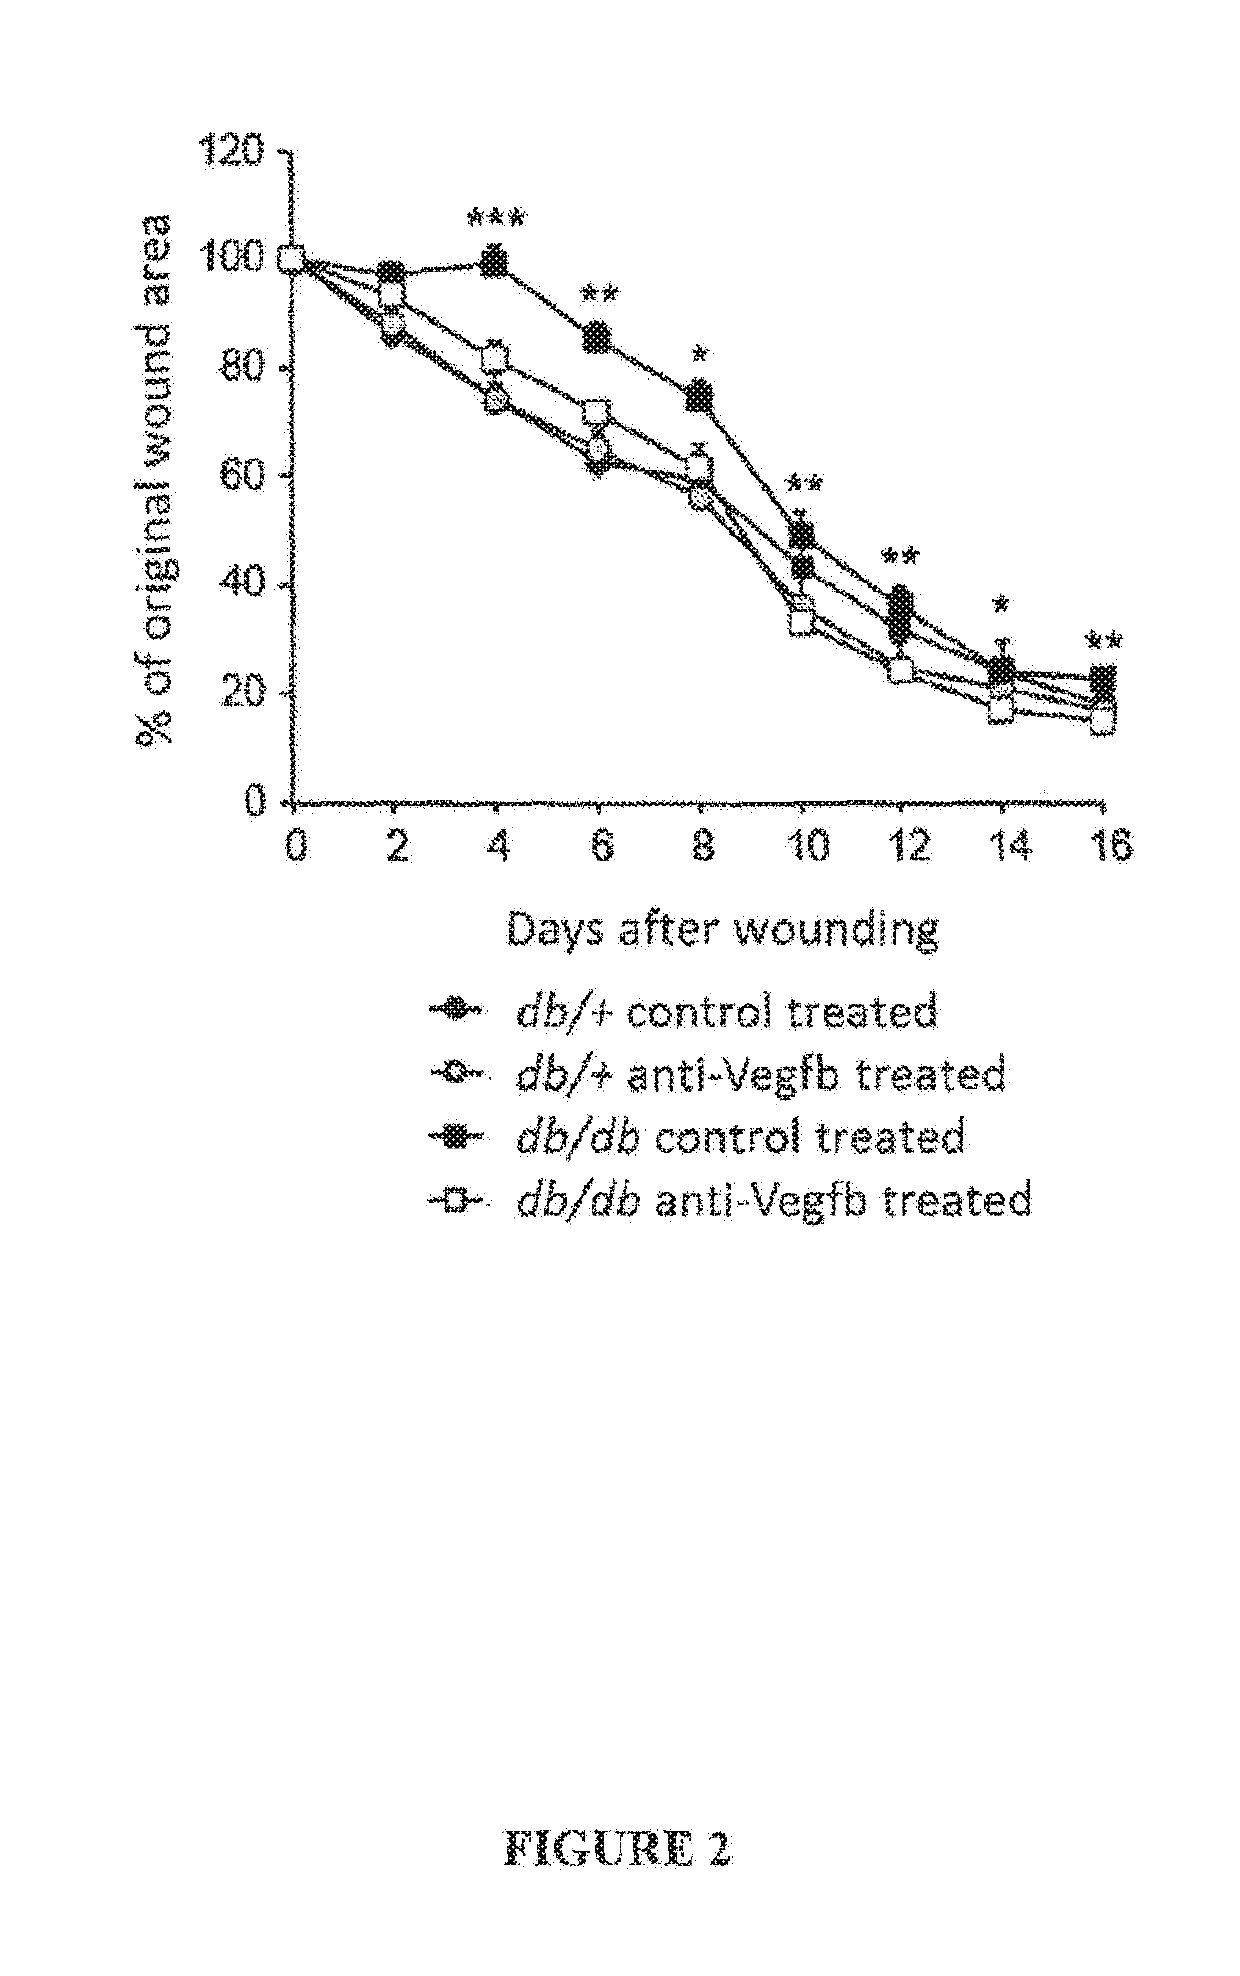 Methods of treating wounds in a diabetic subject